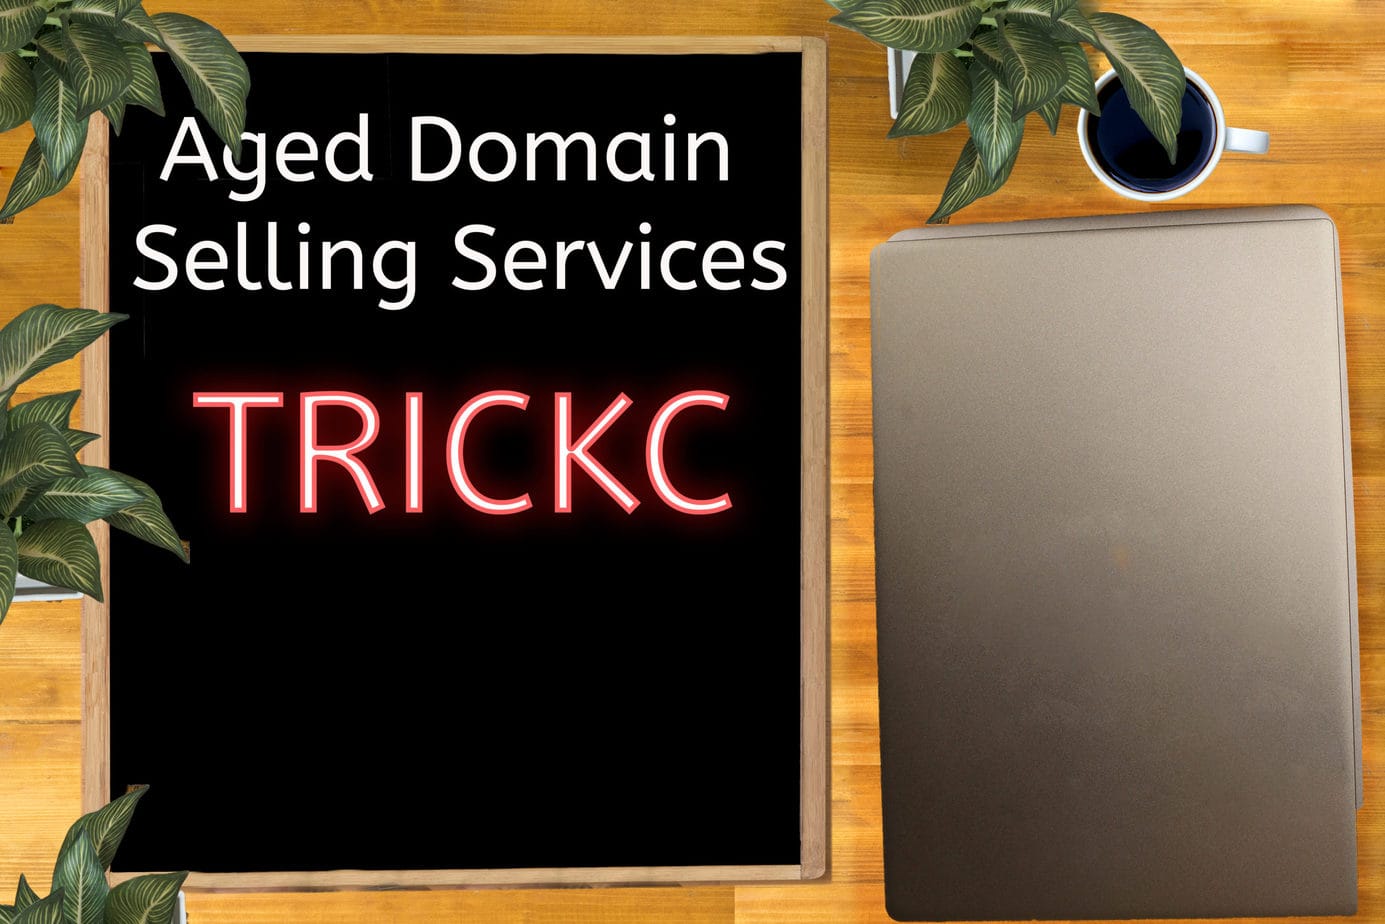 Aged Domain Selling Services